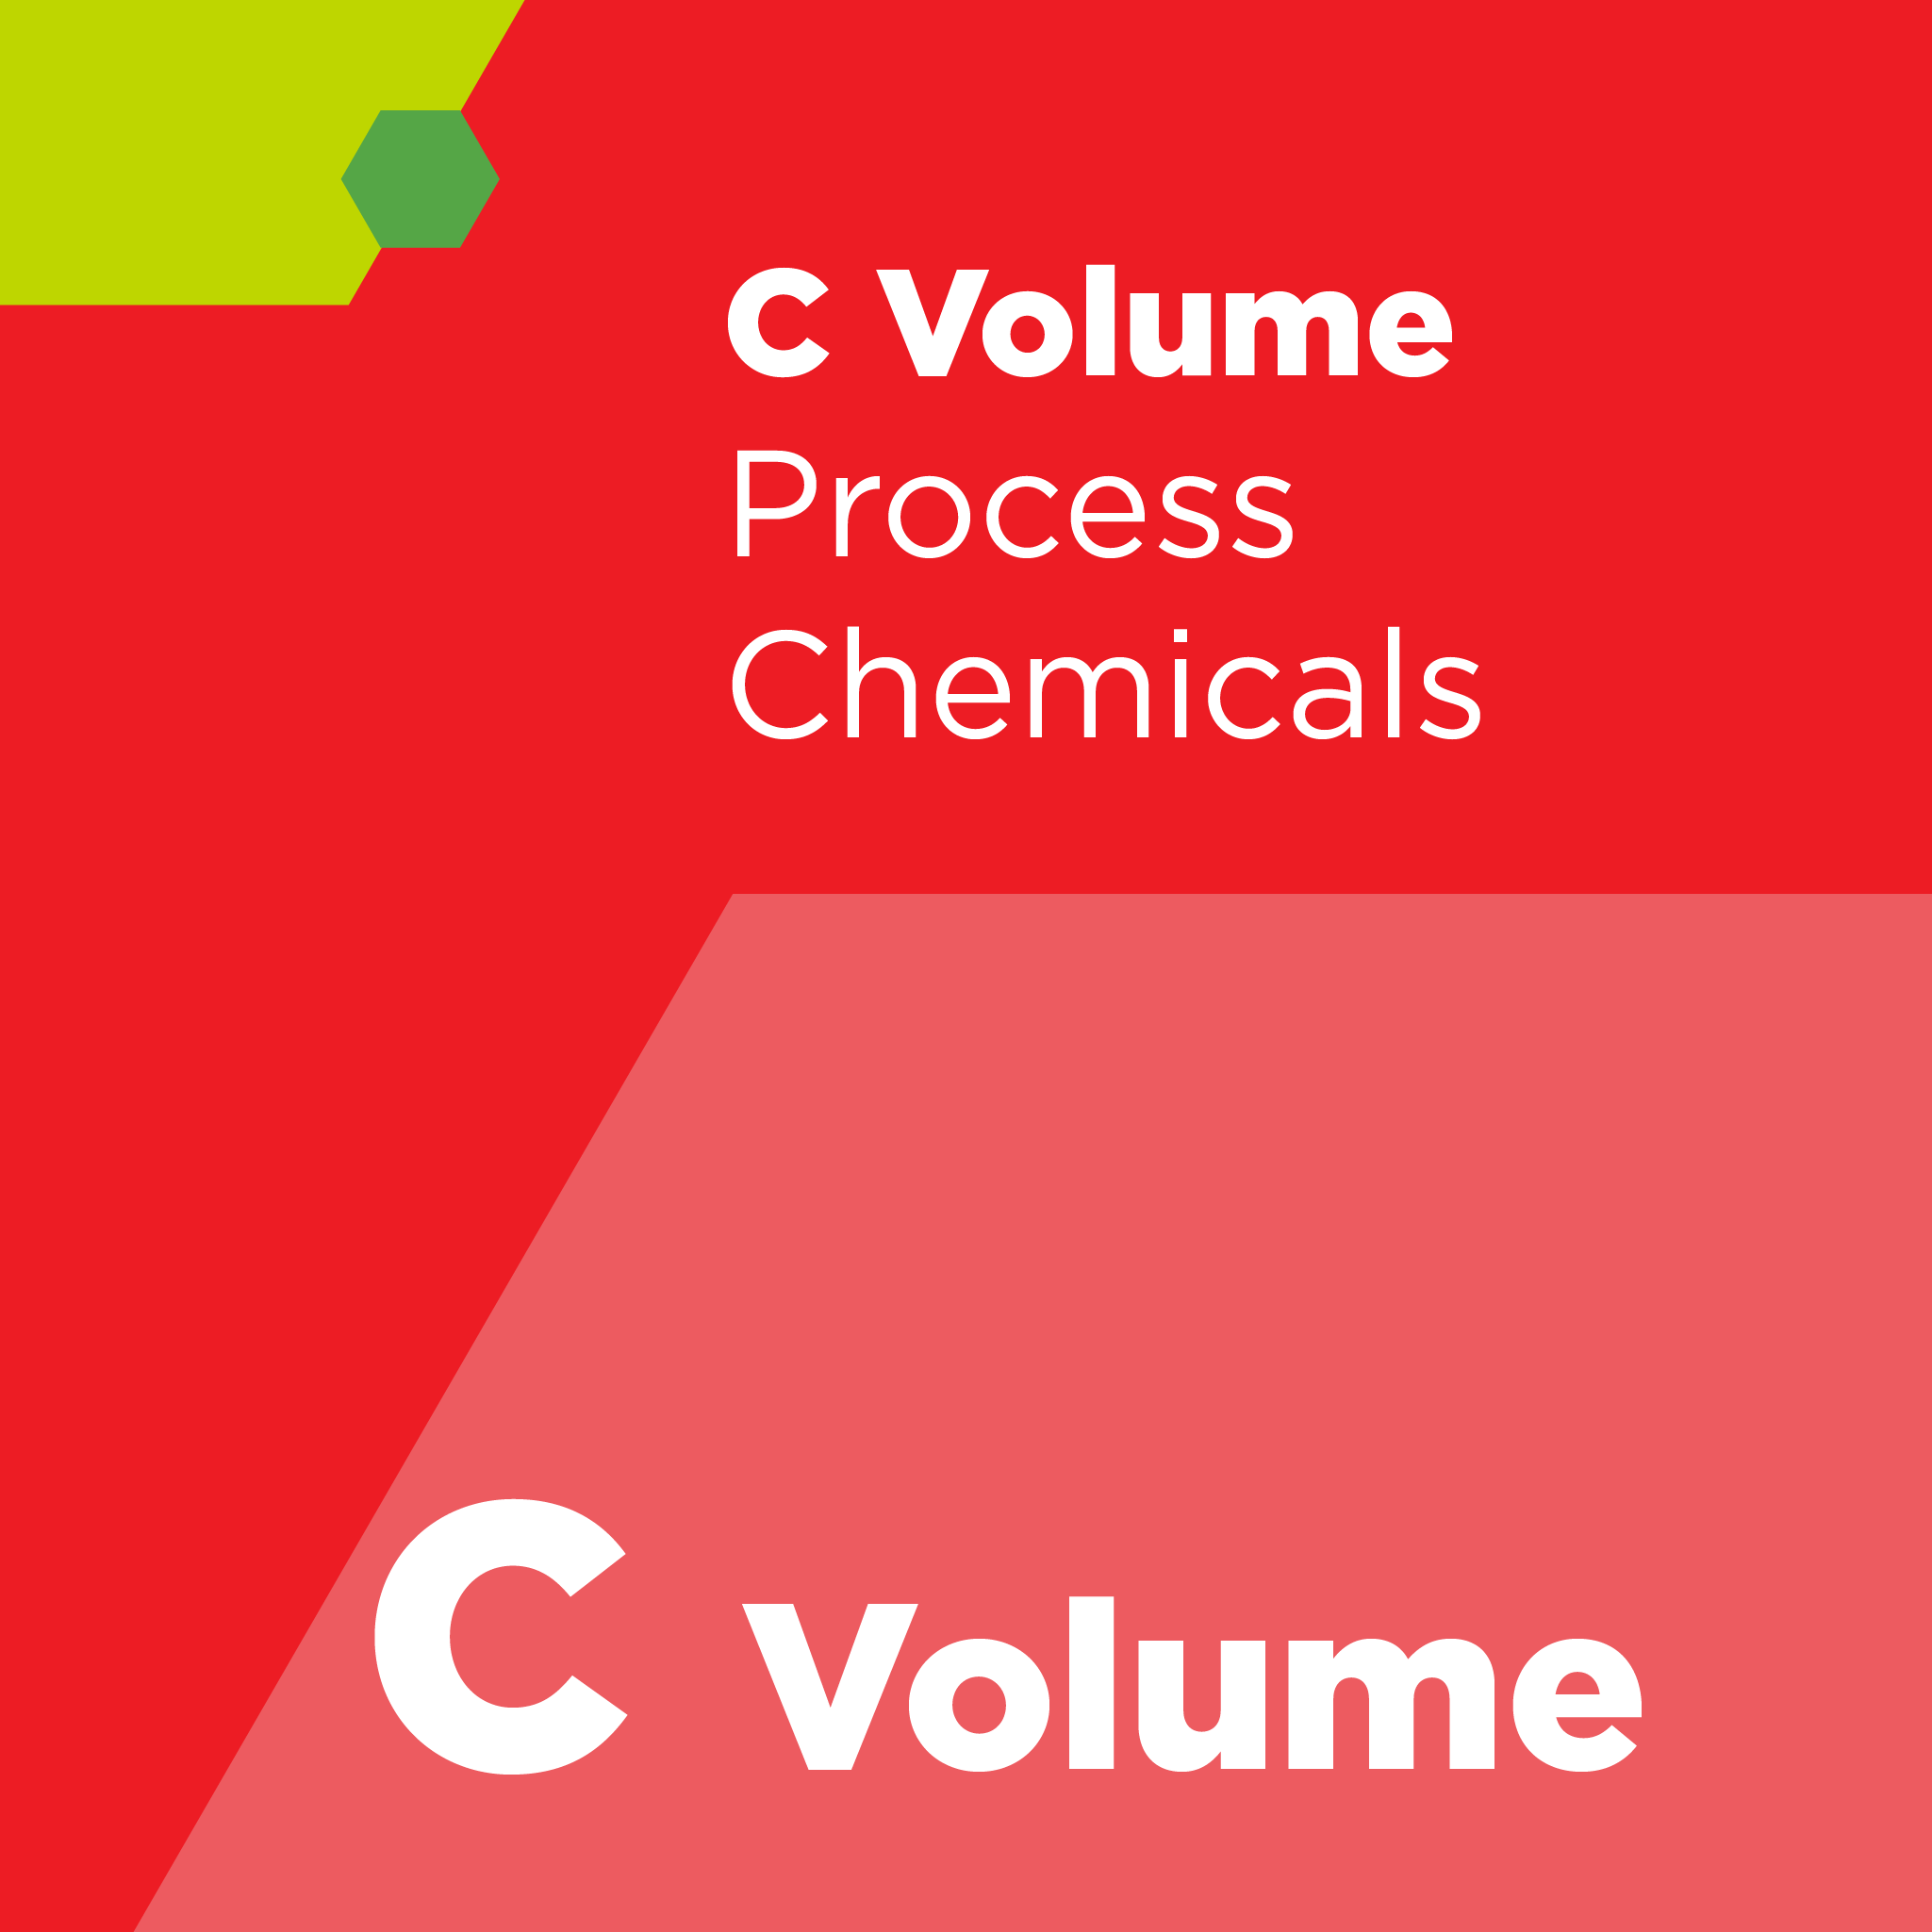 C04800 - SEMI C48 - Specification and Guide for 1,1,1-Trichloroethane, Furnace Grade